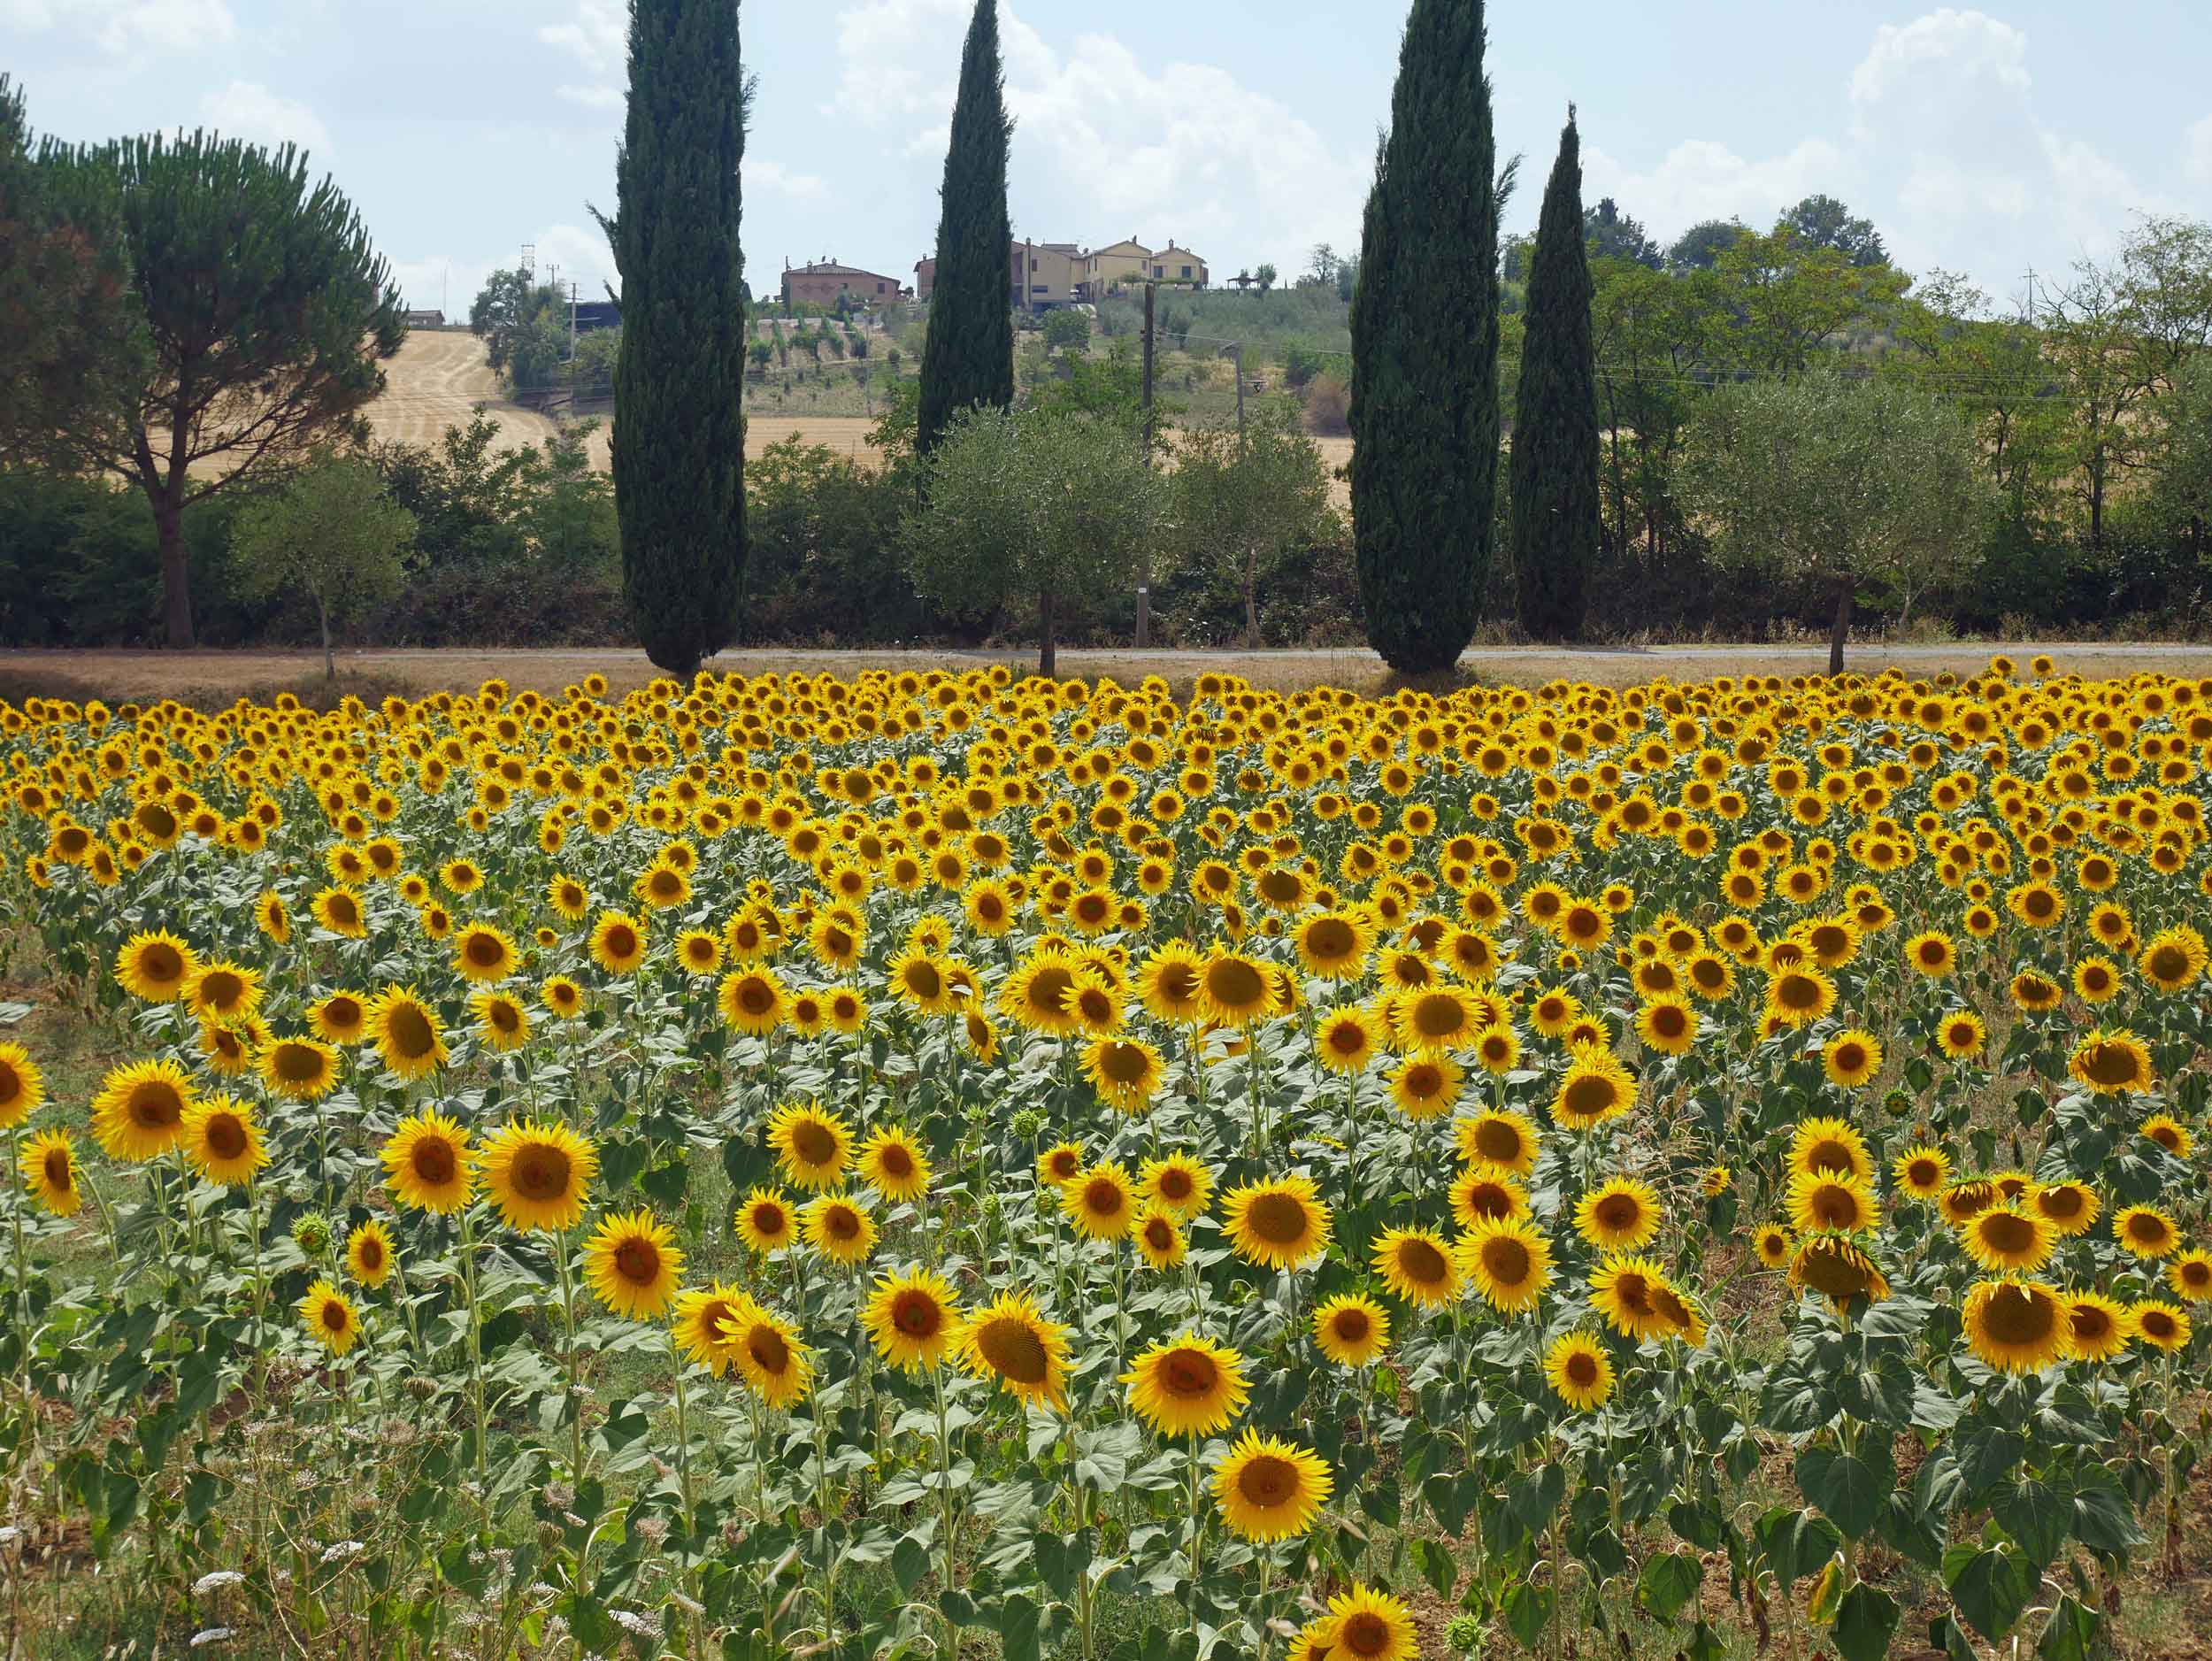  While many of the famous sunflower fields were dried up, we did spot a few bright spots along our drive.&nbsp; 